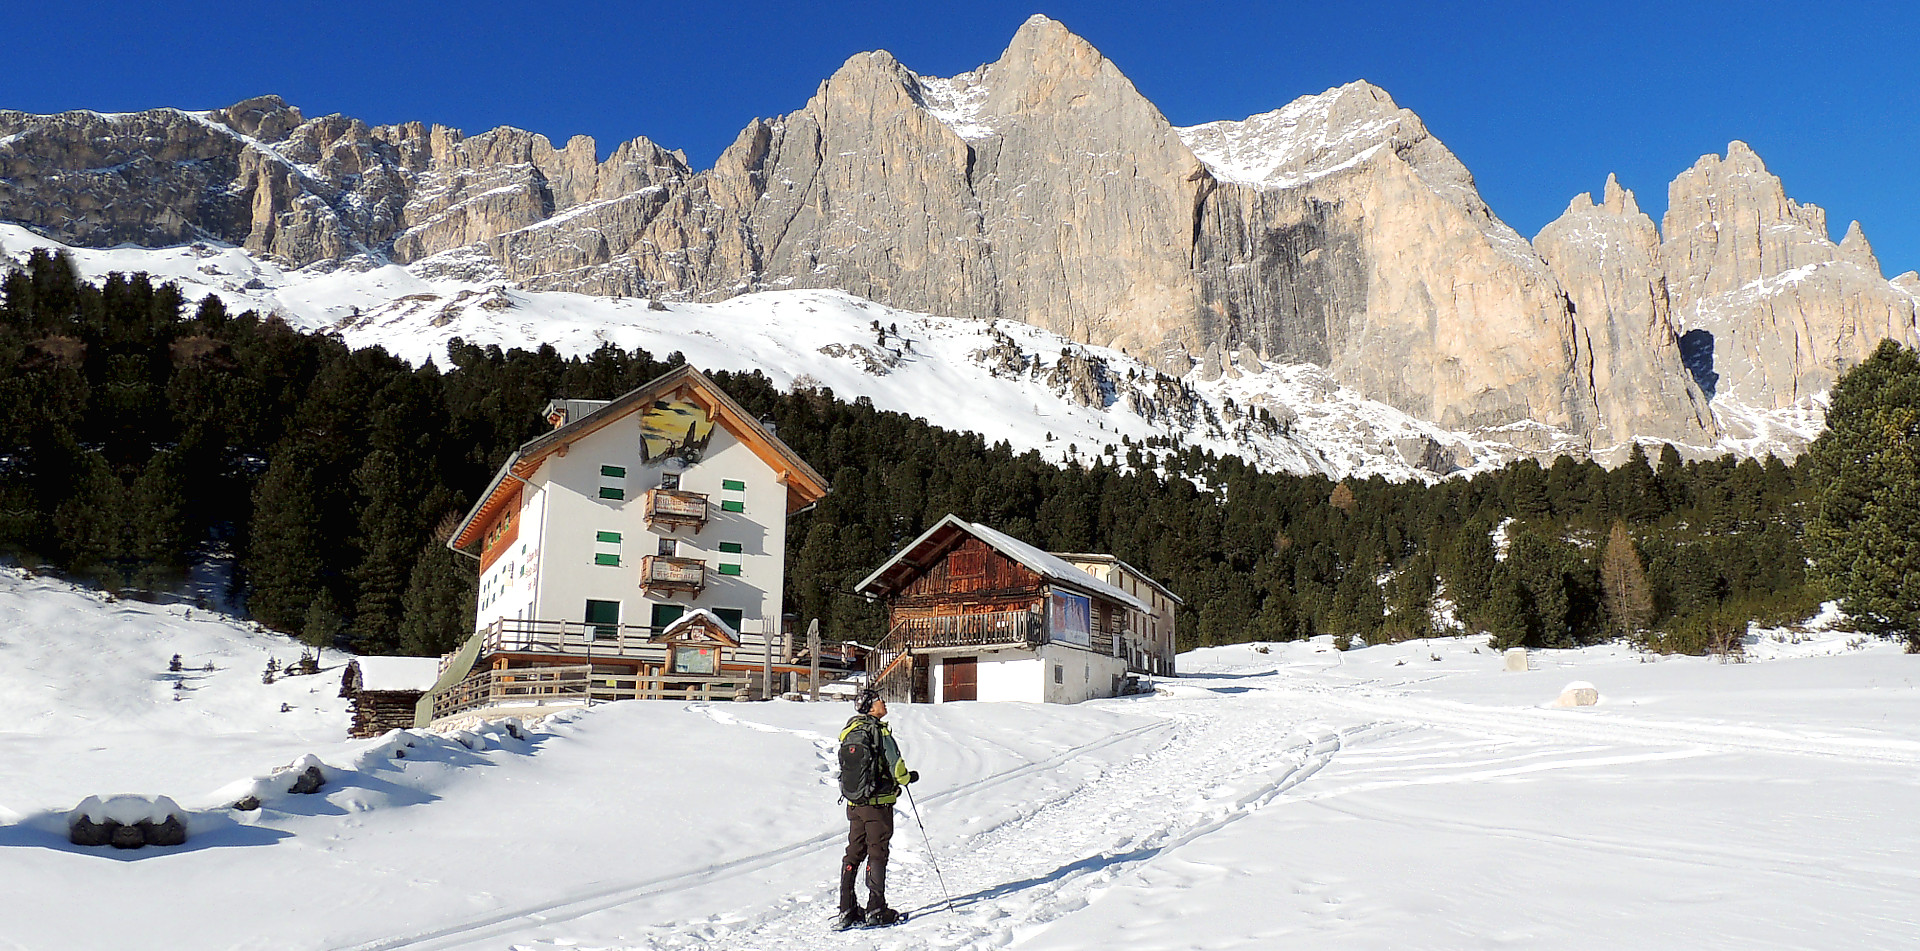 Reaching a warm place in the middle of the Dolomites...